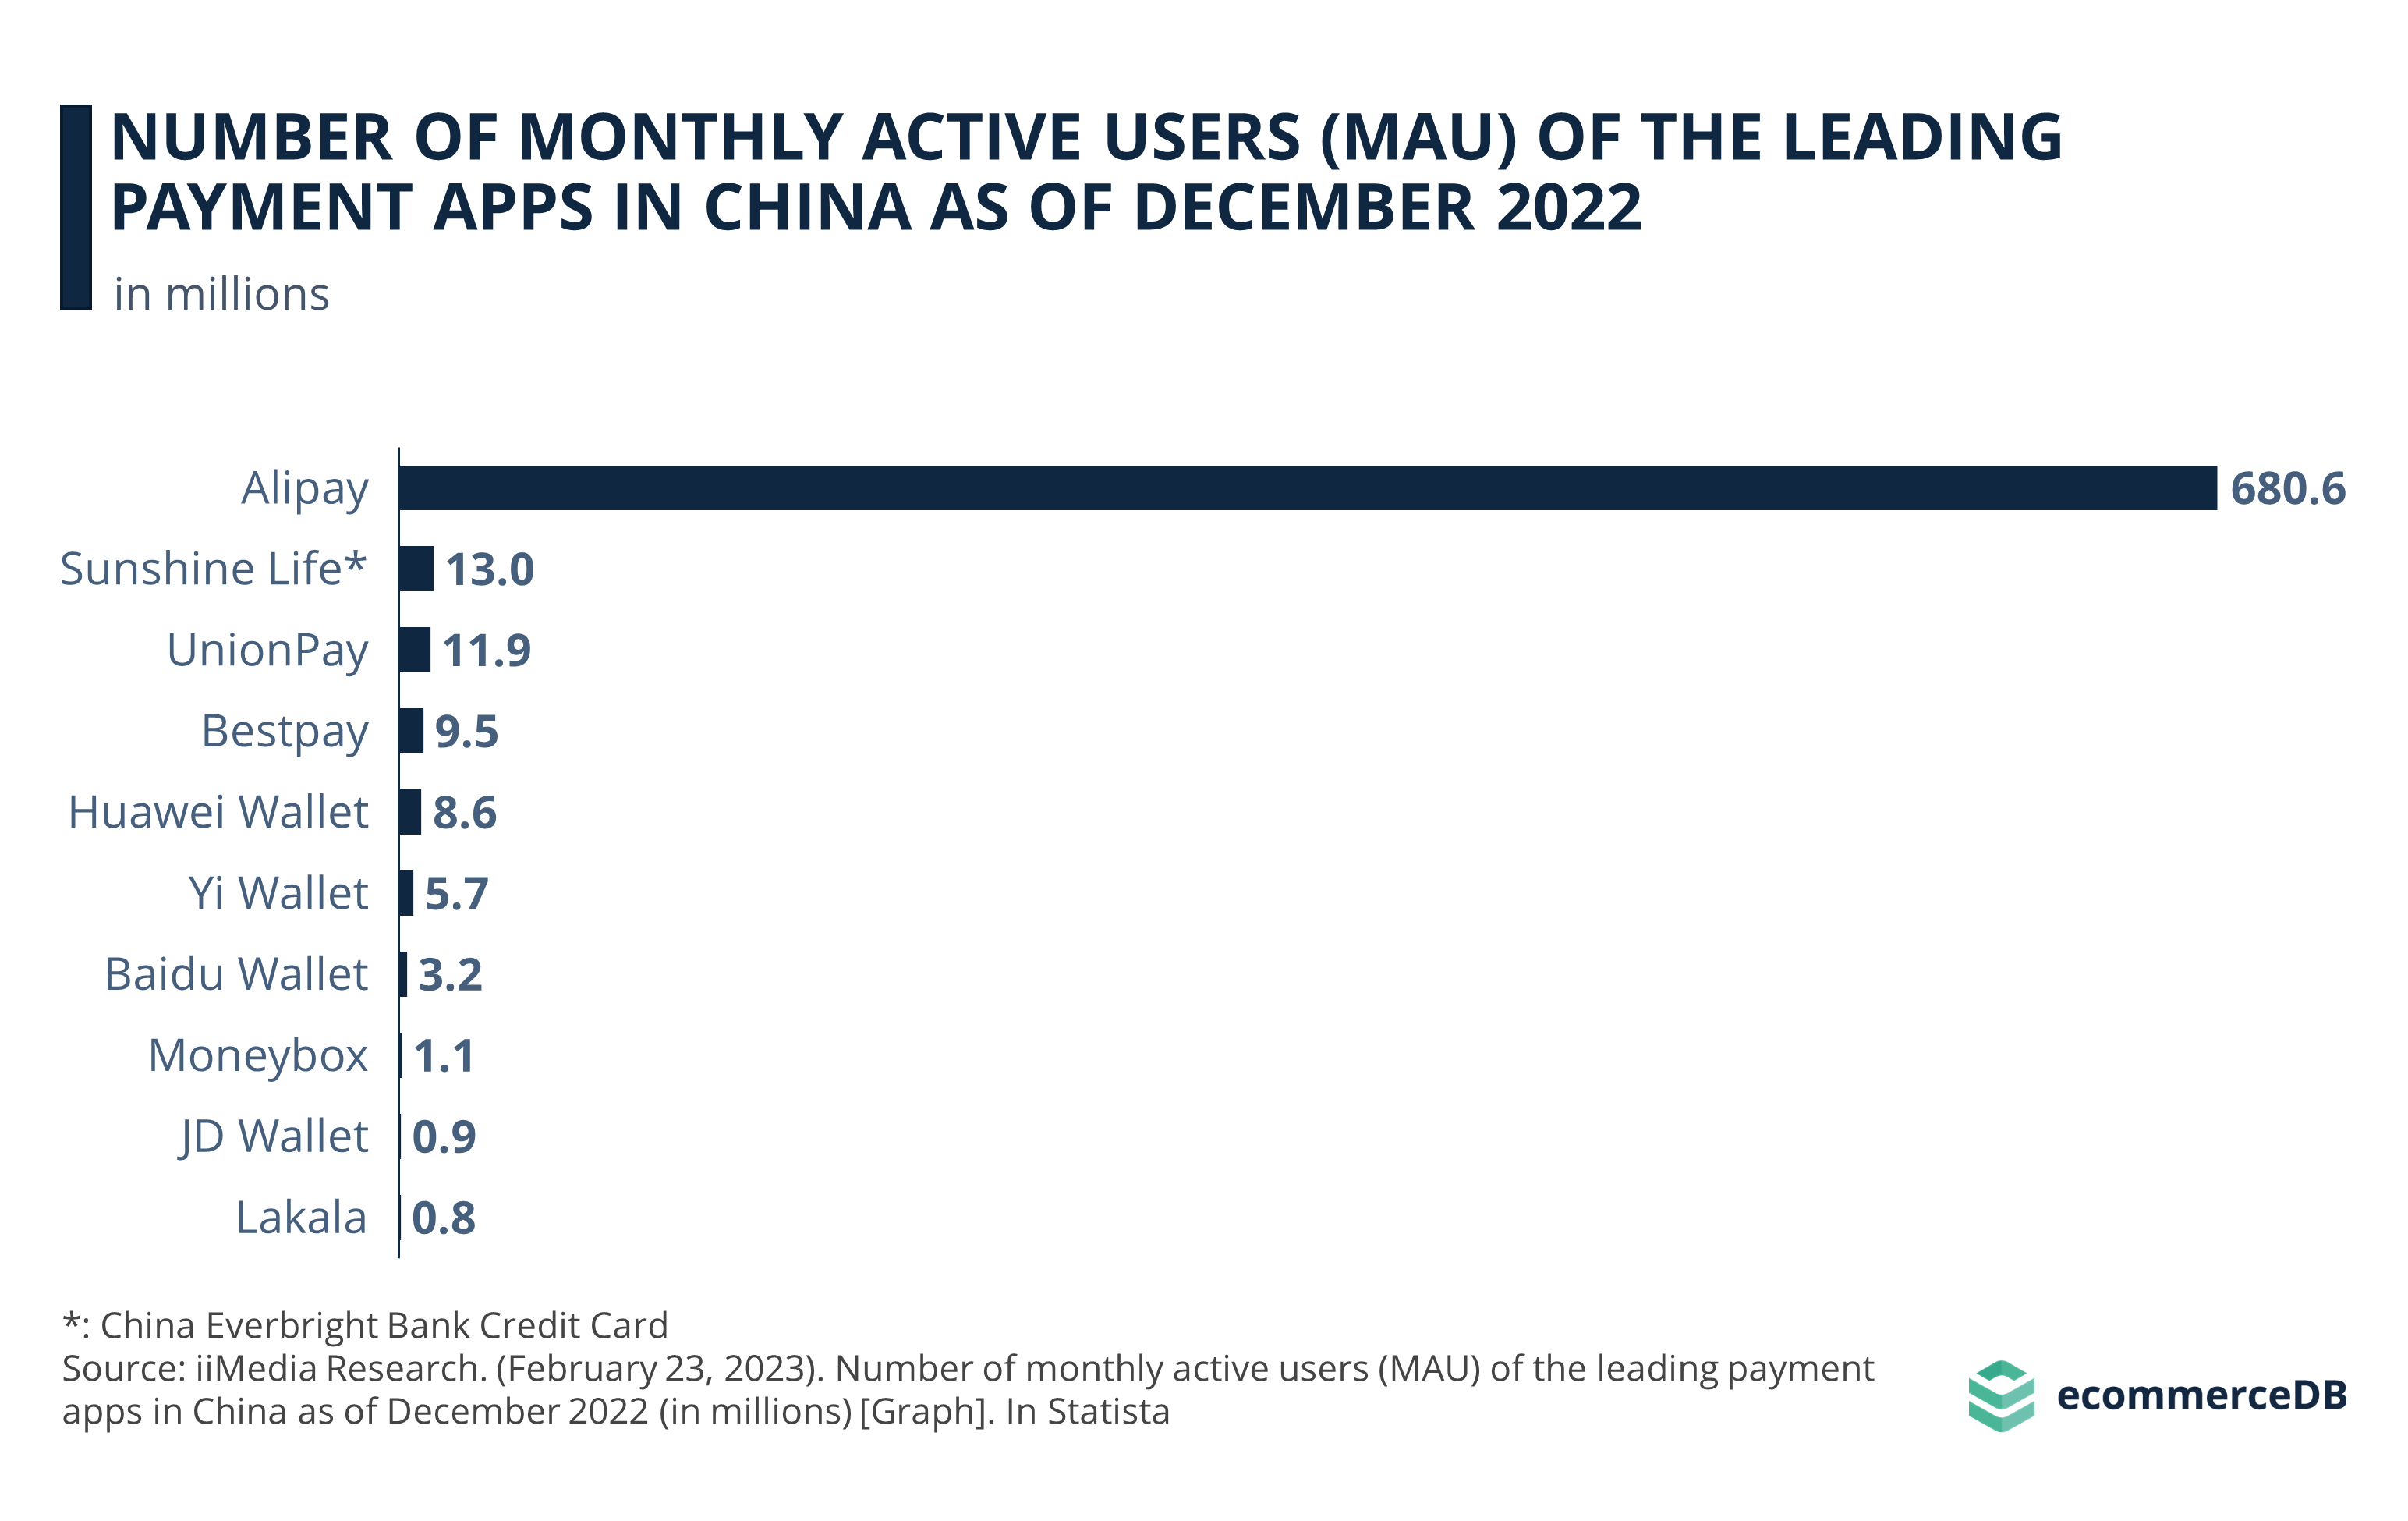 Number of Monthly Active Users (MAU) of the Leading Payment Apps in China as of December 2022